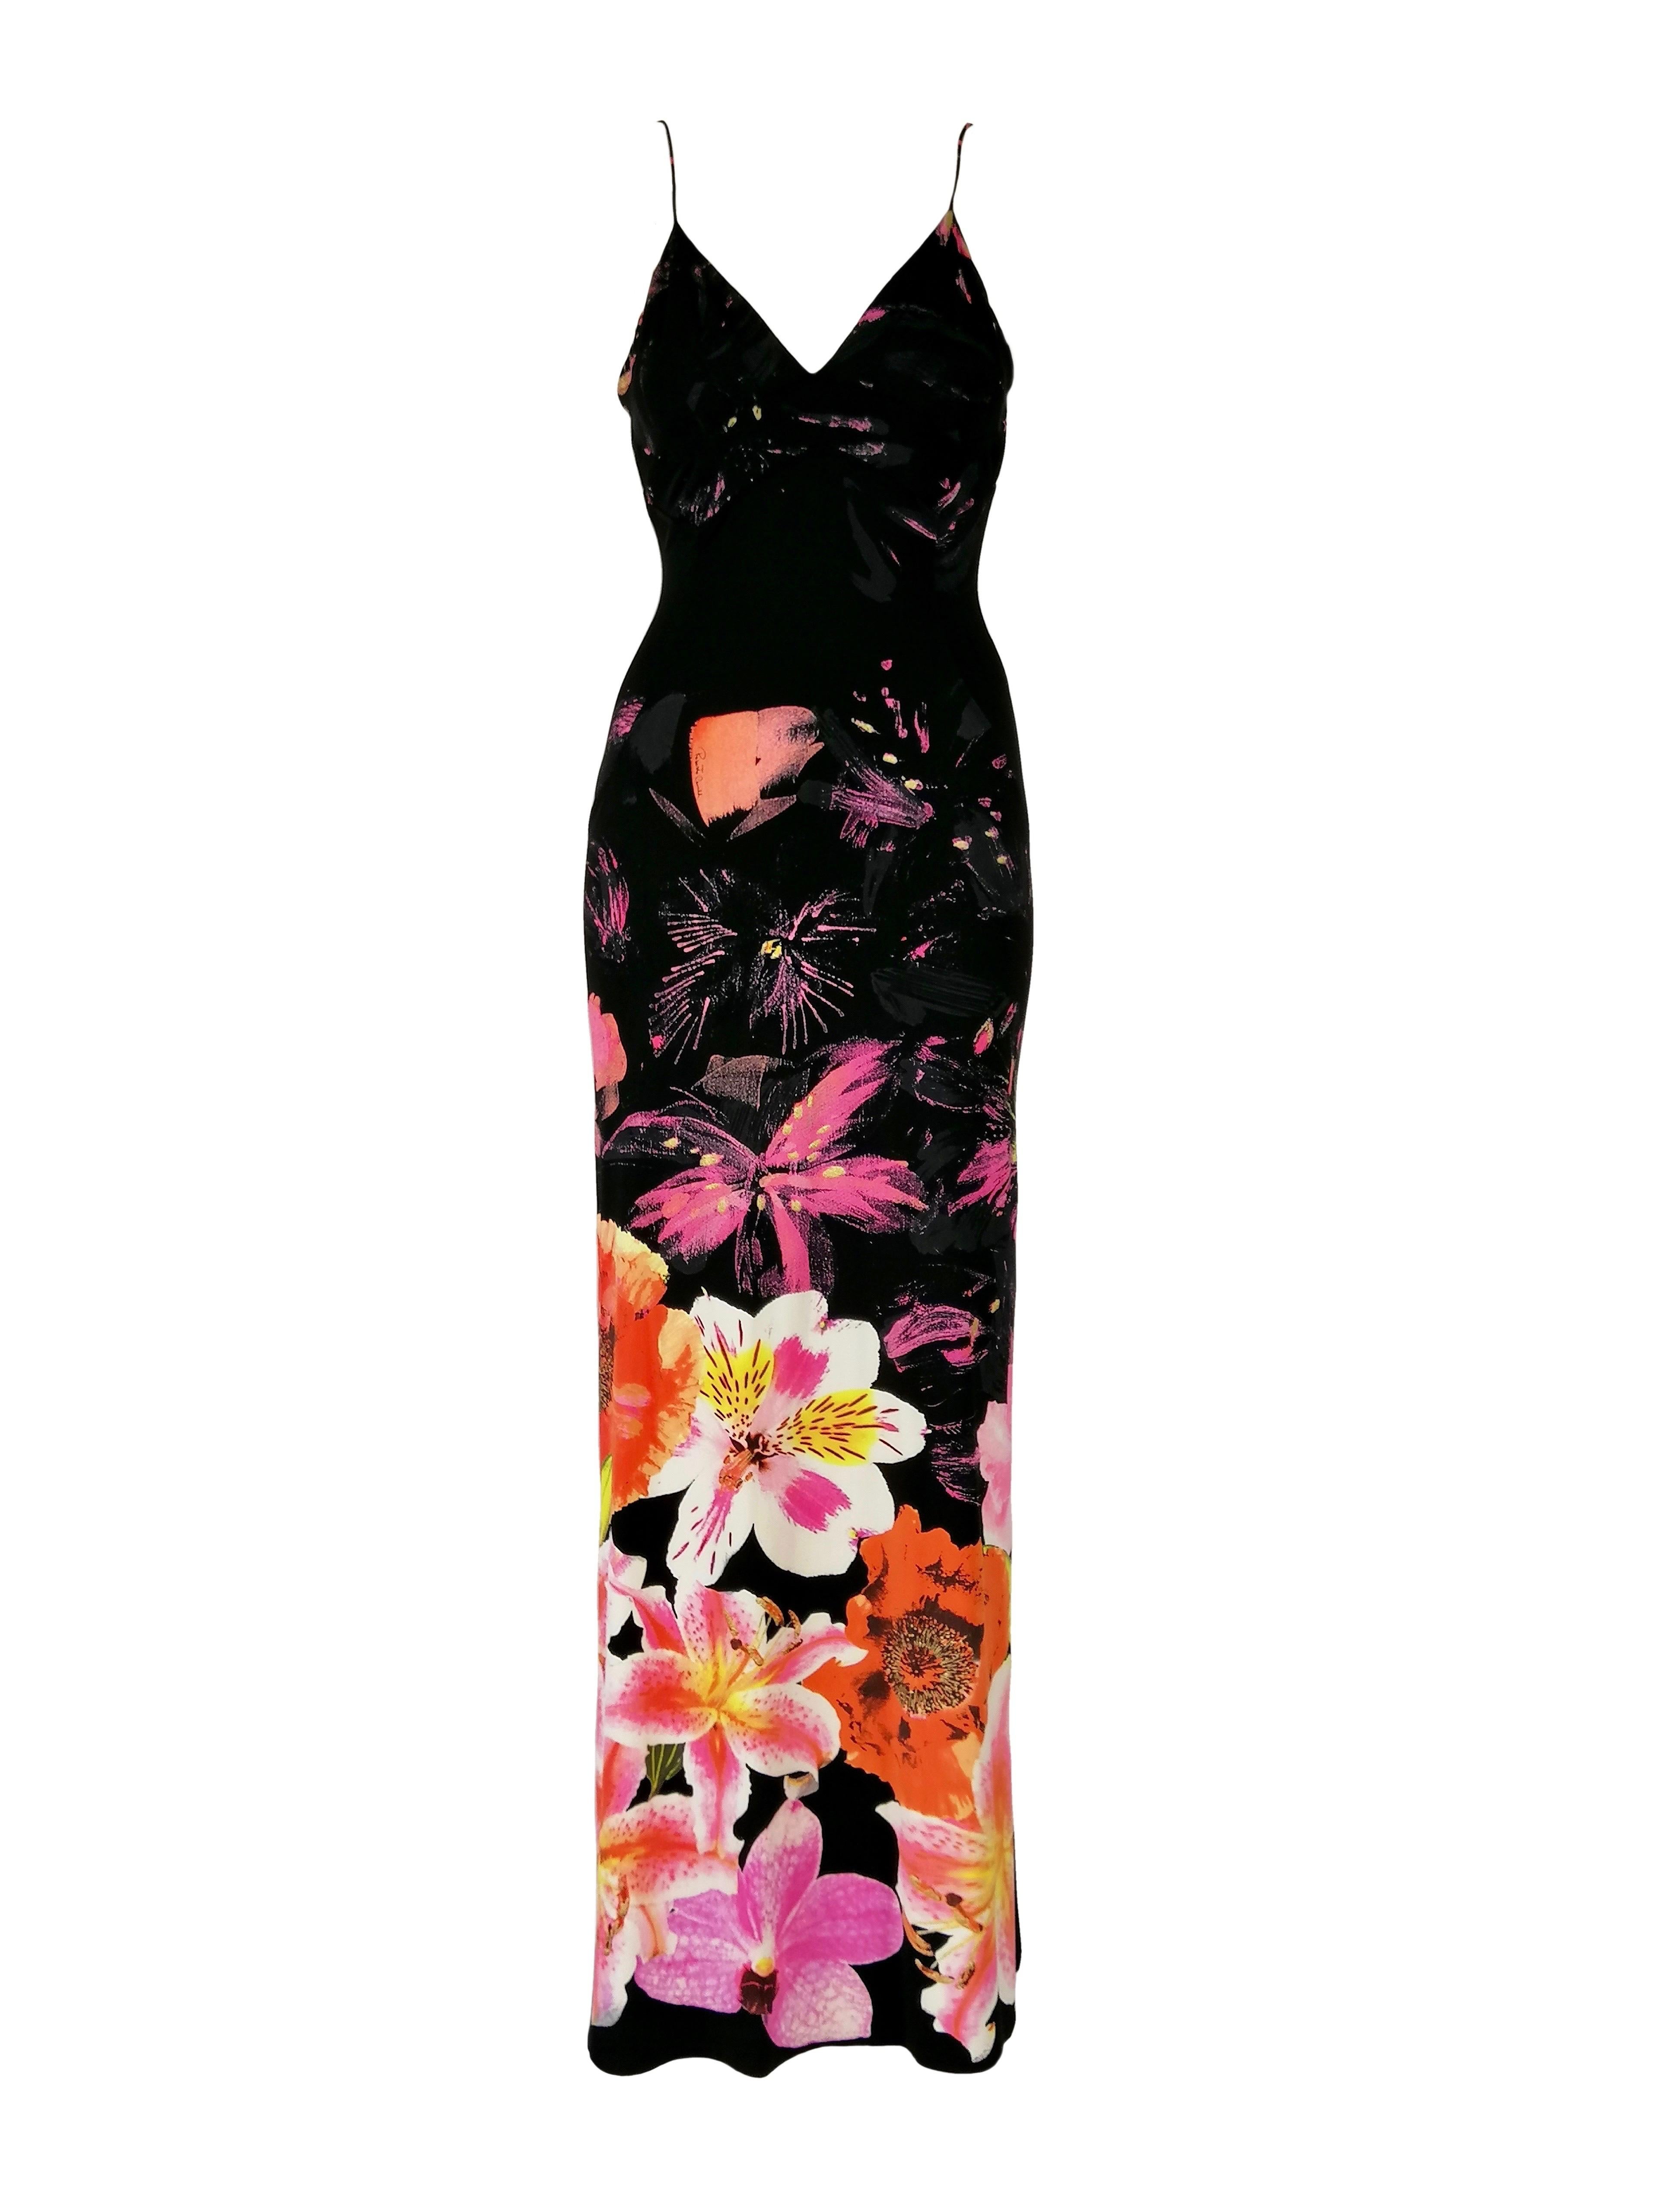 ROBERTO CAVALLI
Long dress, black background, floral pattern, thin straps.
Deep neckline on the back.
90% polyamide/nylon
10% Elastane/Spandex
SIZE L
Made in Italy
Flat measurements:
Length cm. 142
Bust cm. 35
Excellent condition
P.S.: The necklace